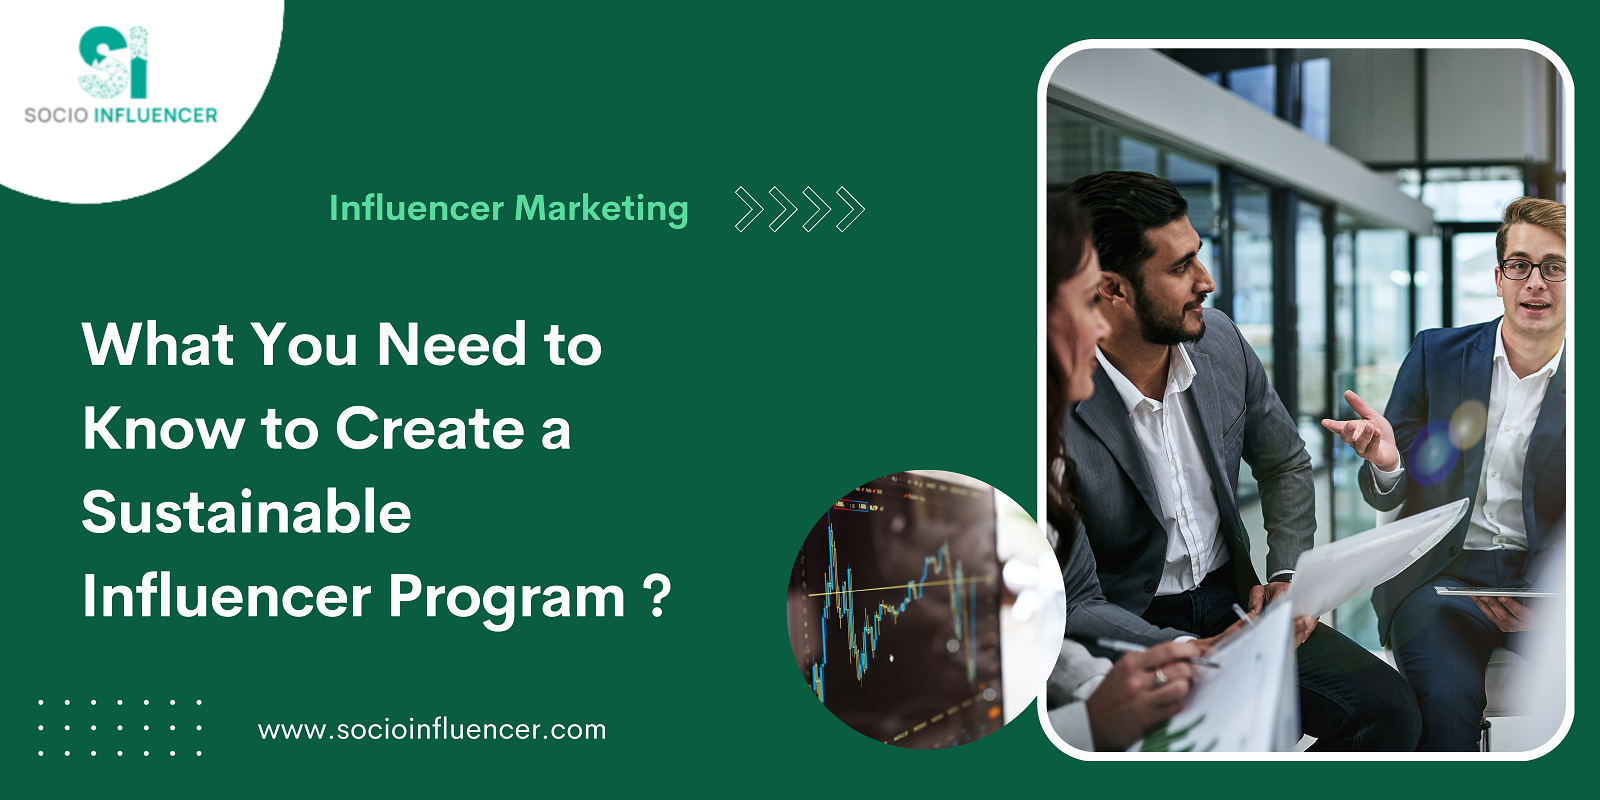 What You Need to Know to Create a Sustainable Influencer Program | Socio Influencer